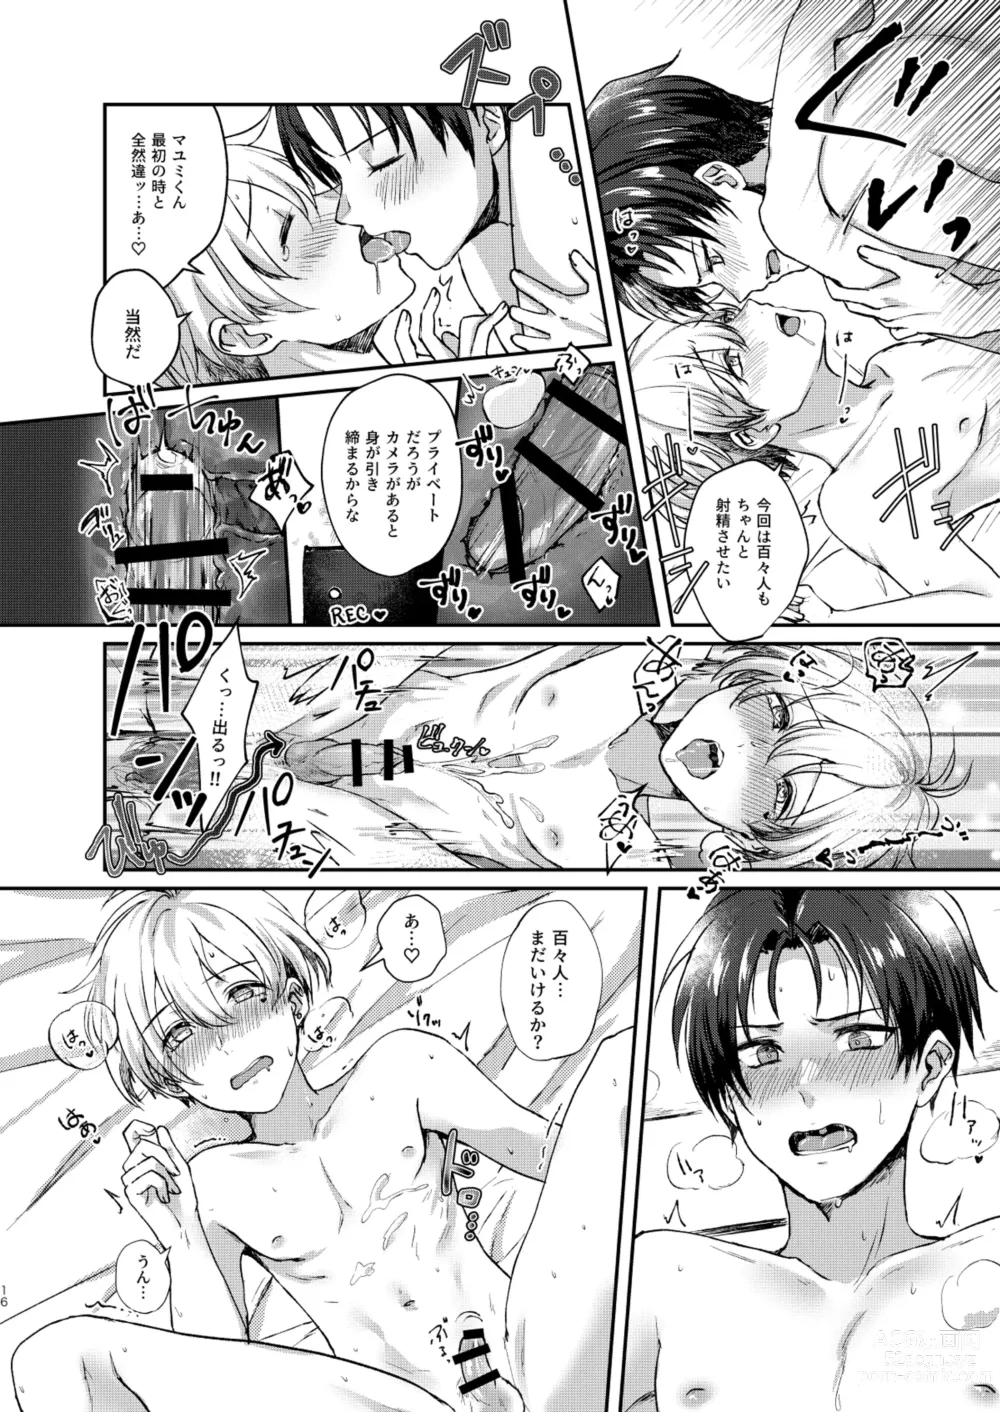 Page 16 of doujinshi Second Bite of the Apple